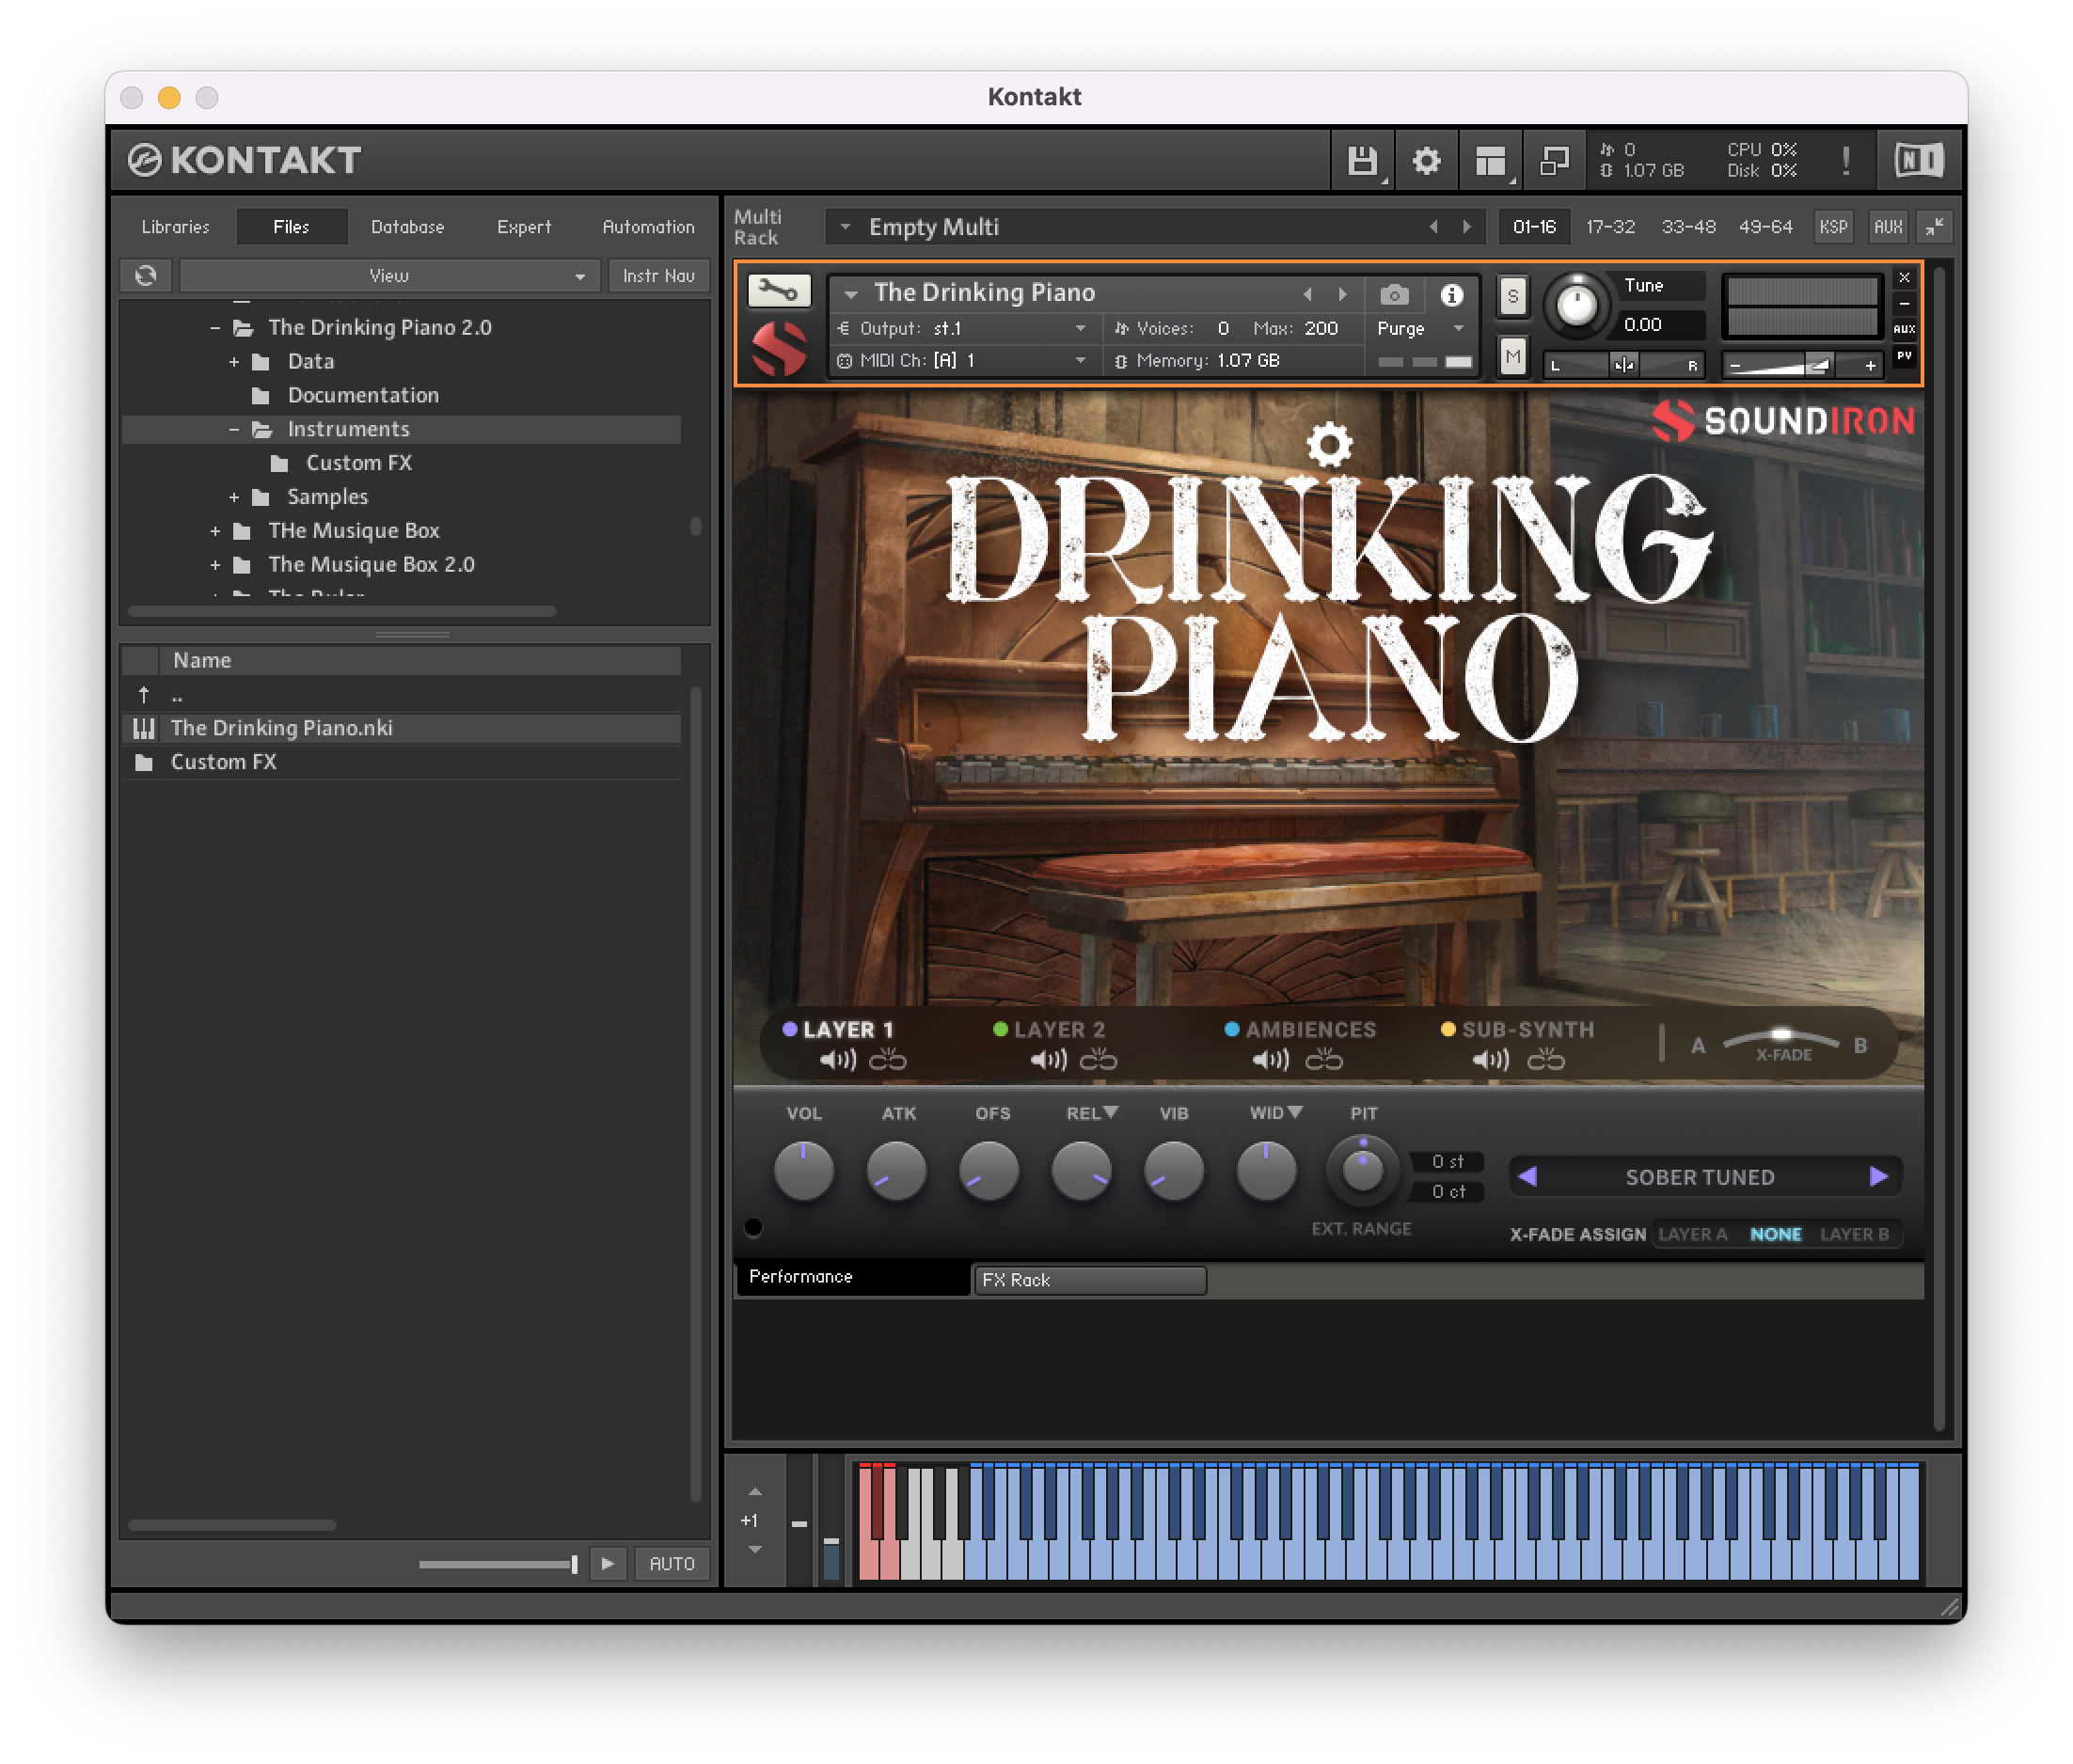 The NEW Drinking Piano 2.0: Tuned and Untuned Pianos, Bench Creaks, Plucks, Pedal Noises, SFX, Atmospheric Pads, Drones, Evolving Textures!